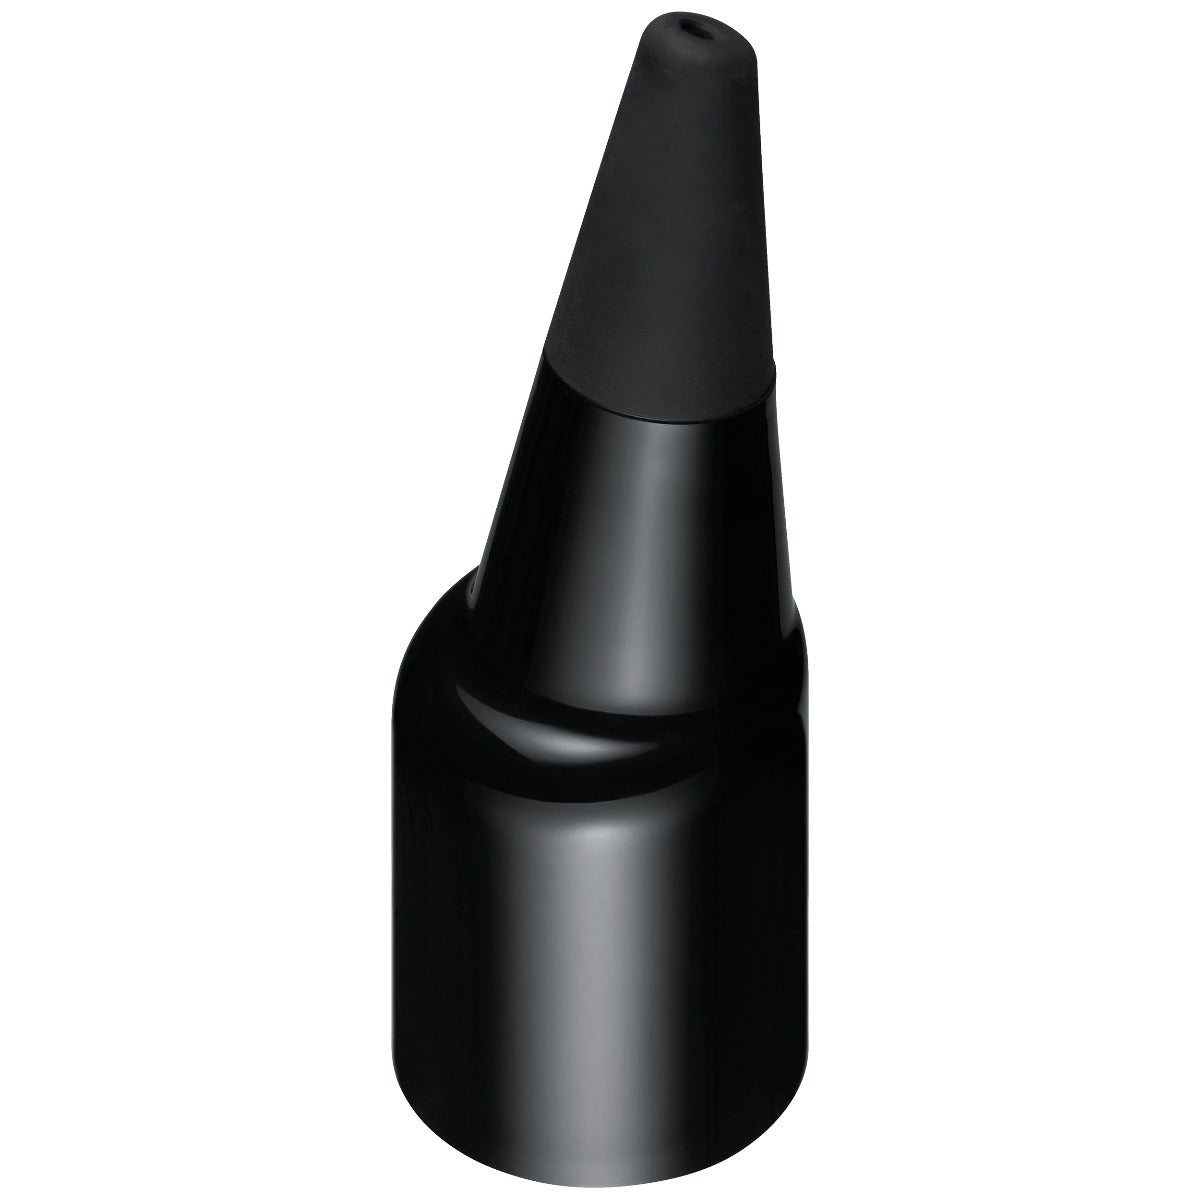 Image of the replacement mouthpiece for Aerophone Mini